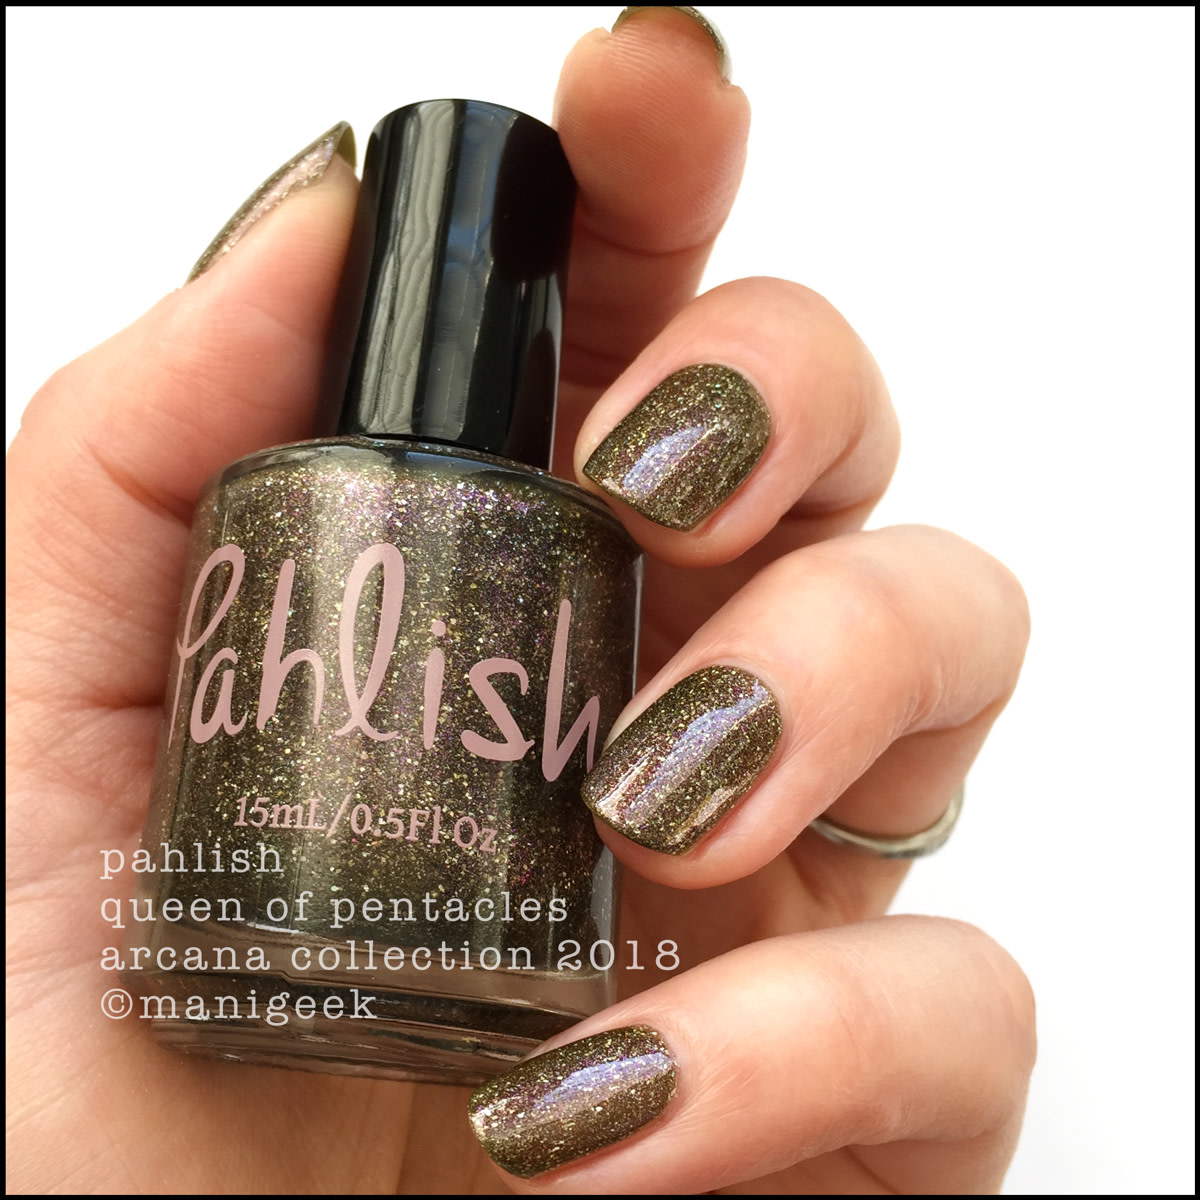 Pahlish Queen of Pentacles - Pahlish Arcana Collection Swatches Review 2018